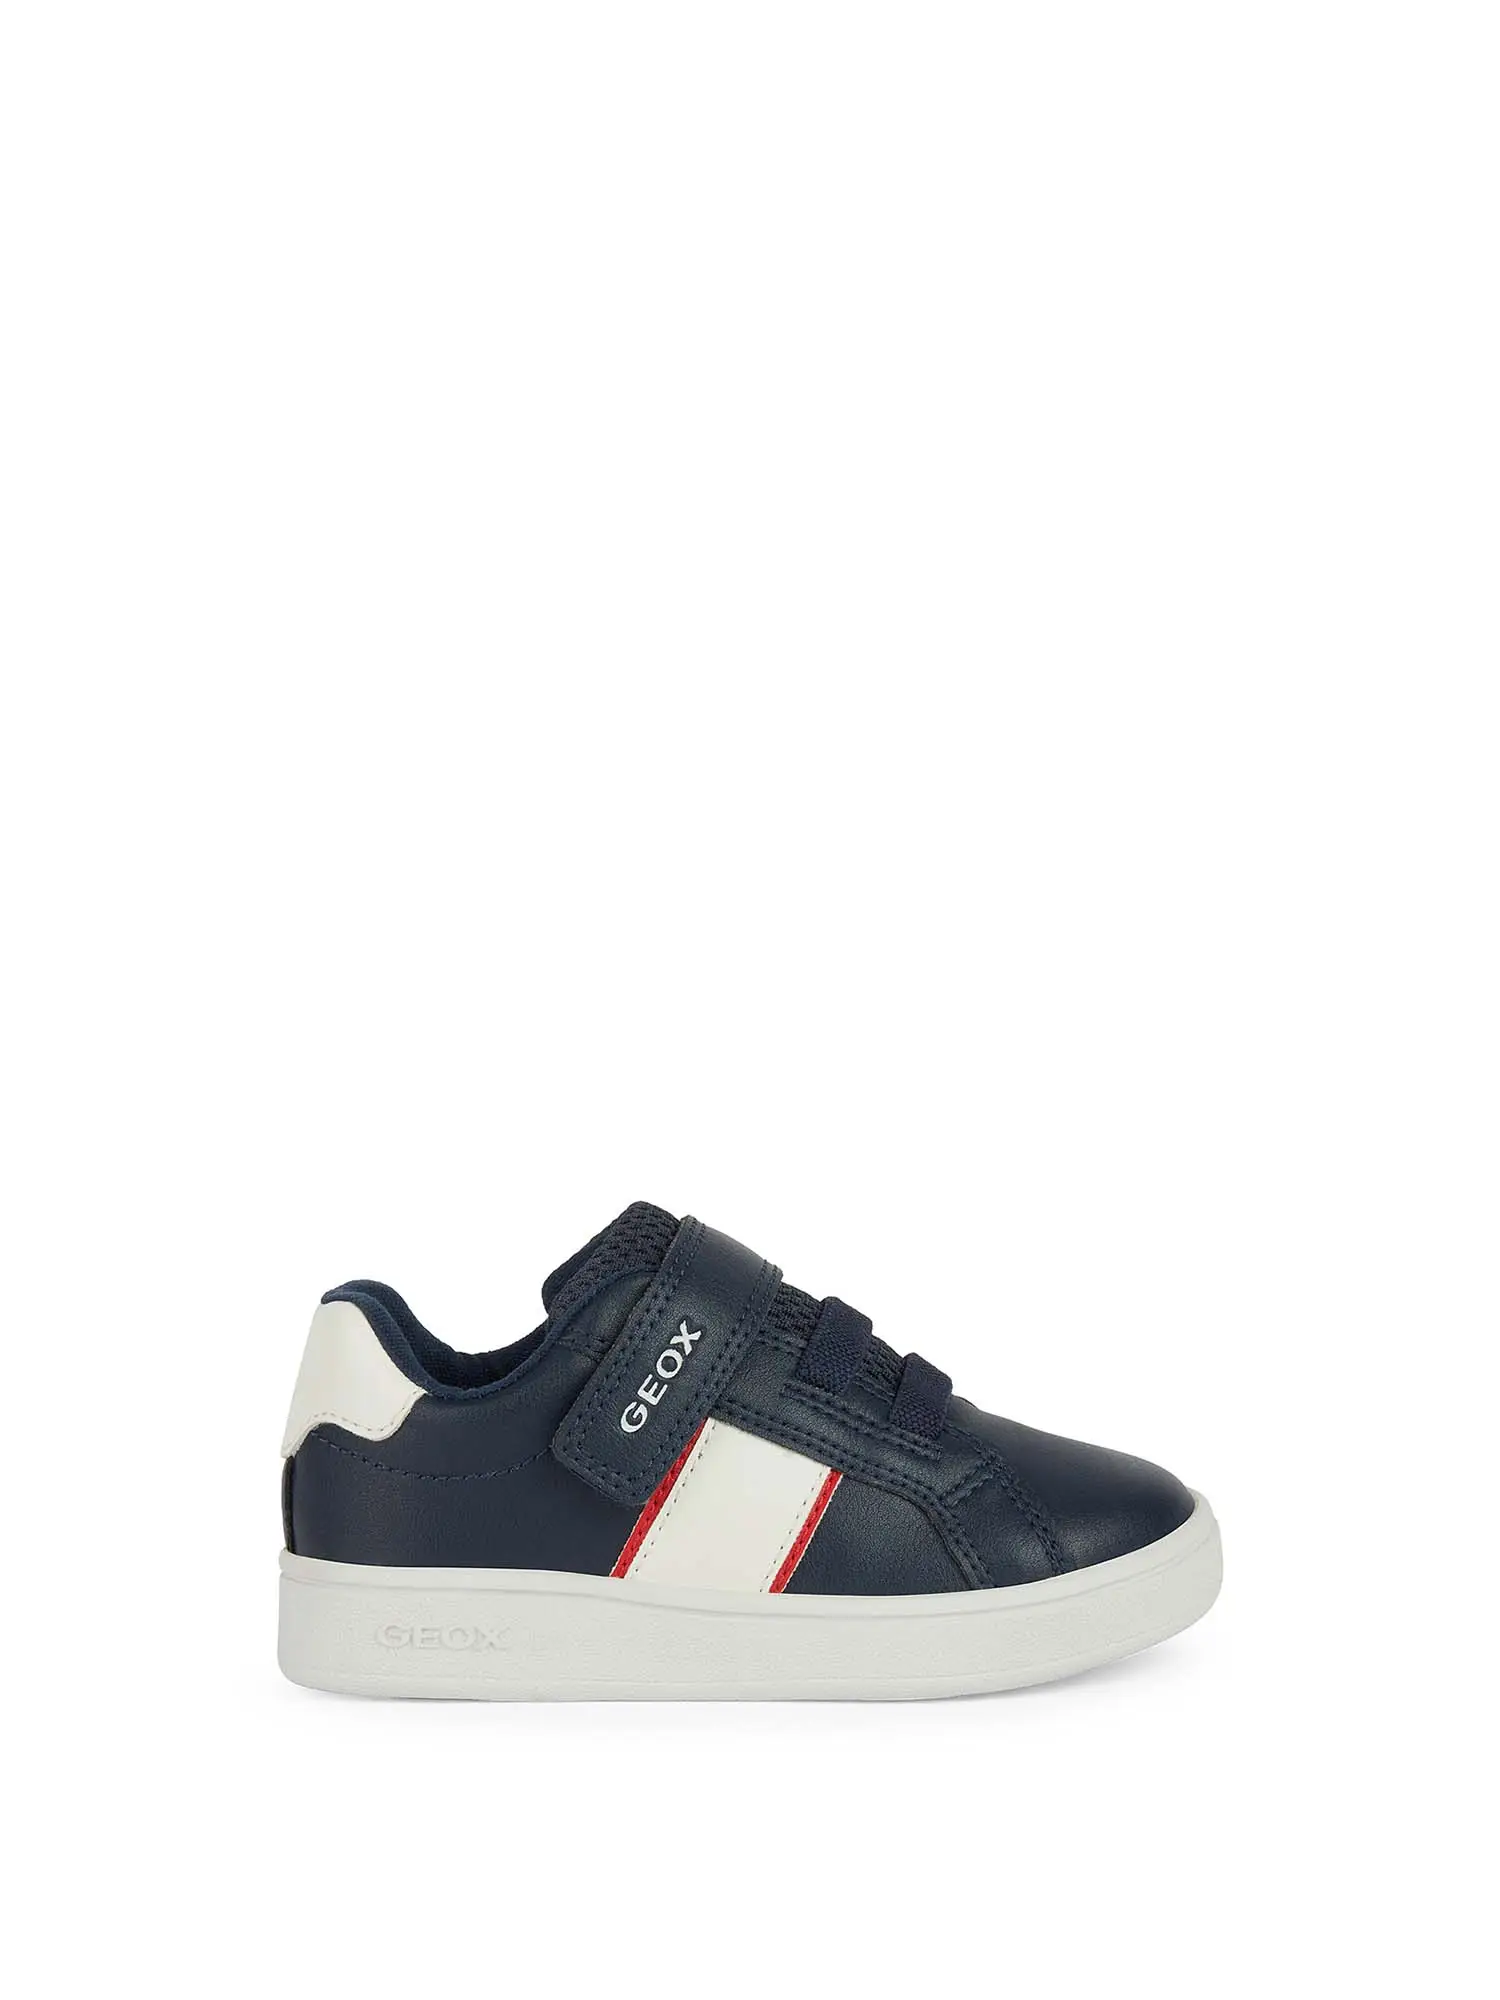 SNEAKERS BAMBINO - GEOX - B455LA 000BC - NAVY/ROSSO, 21